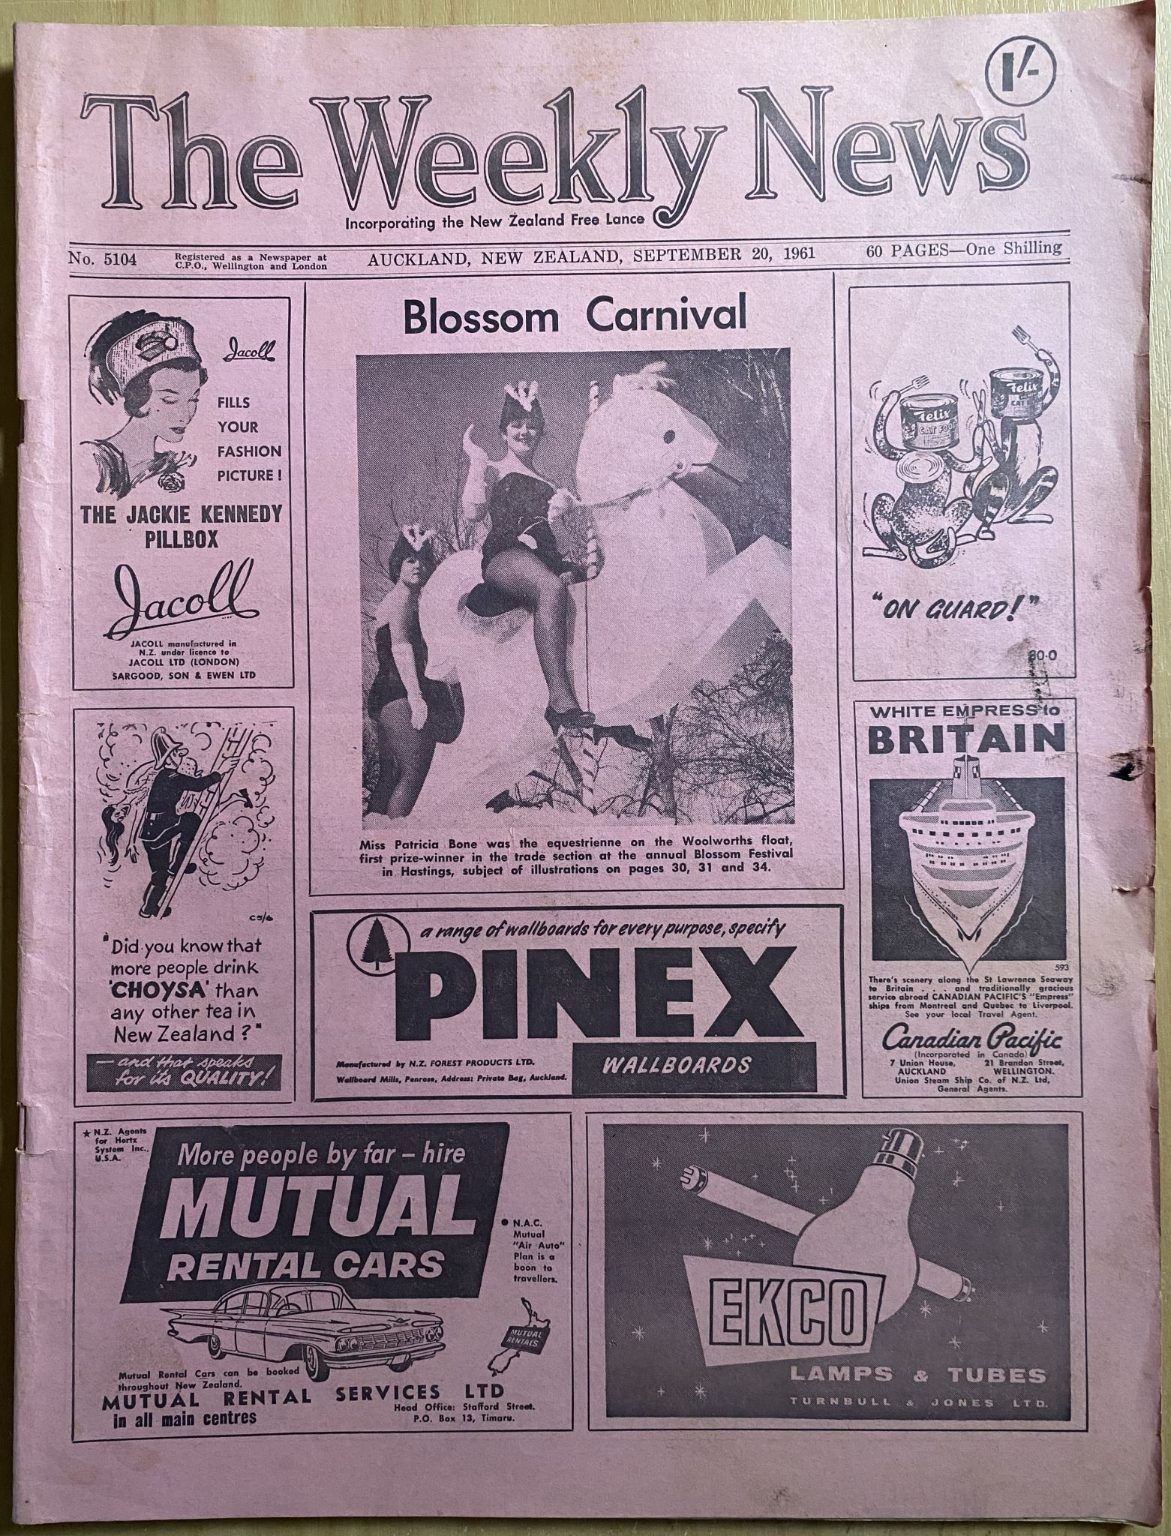 OLD NEWSPAPER: The Weekly News, No. 5104, 20 September 1961